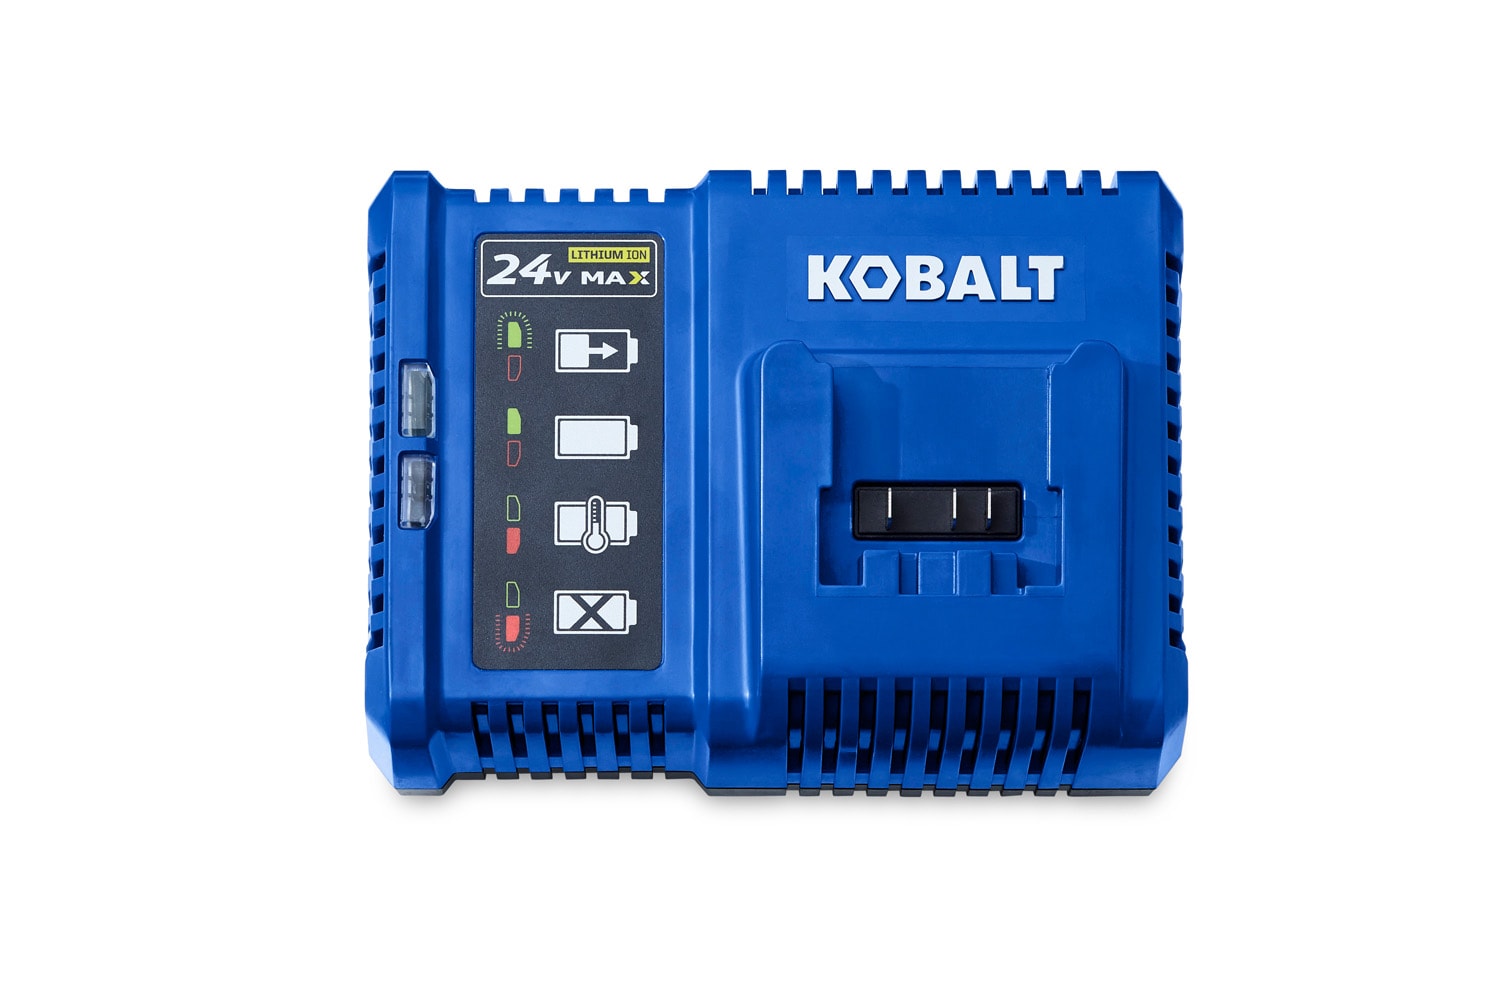 Kobalt 24-V Lithium-ion Battery Charger (Charger Included) in the